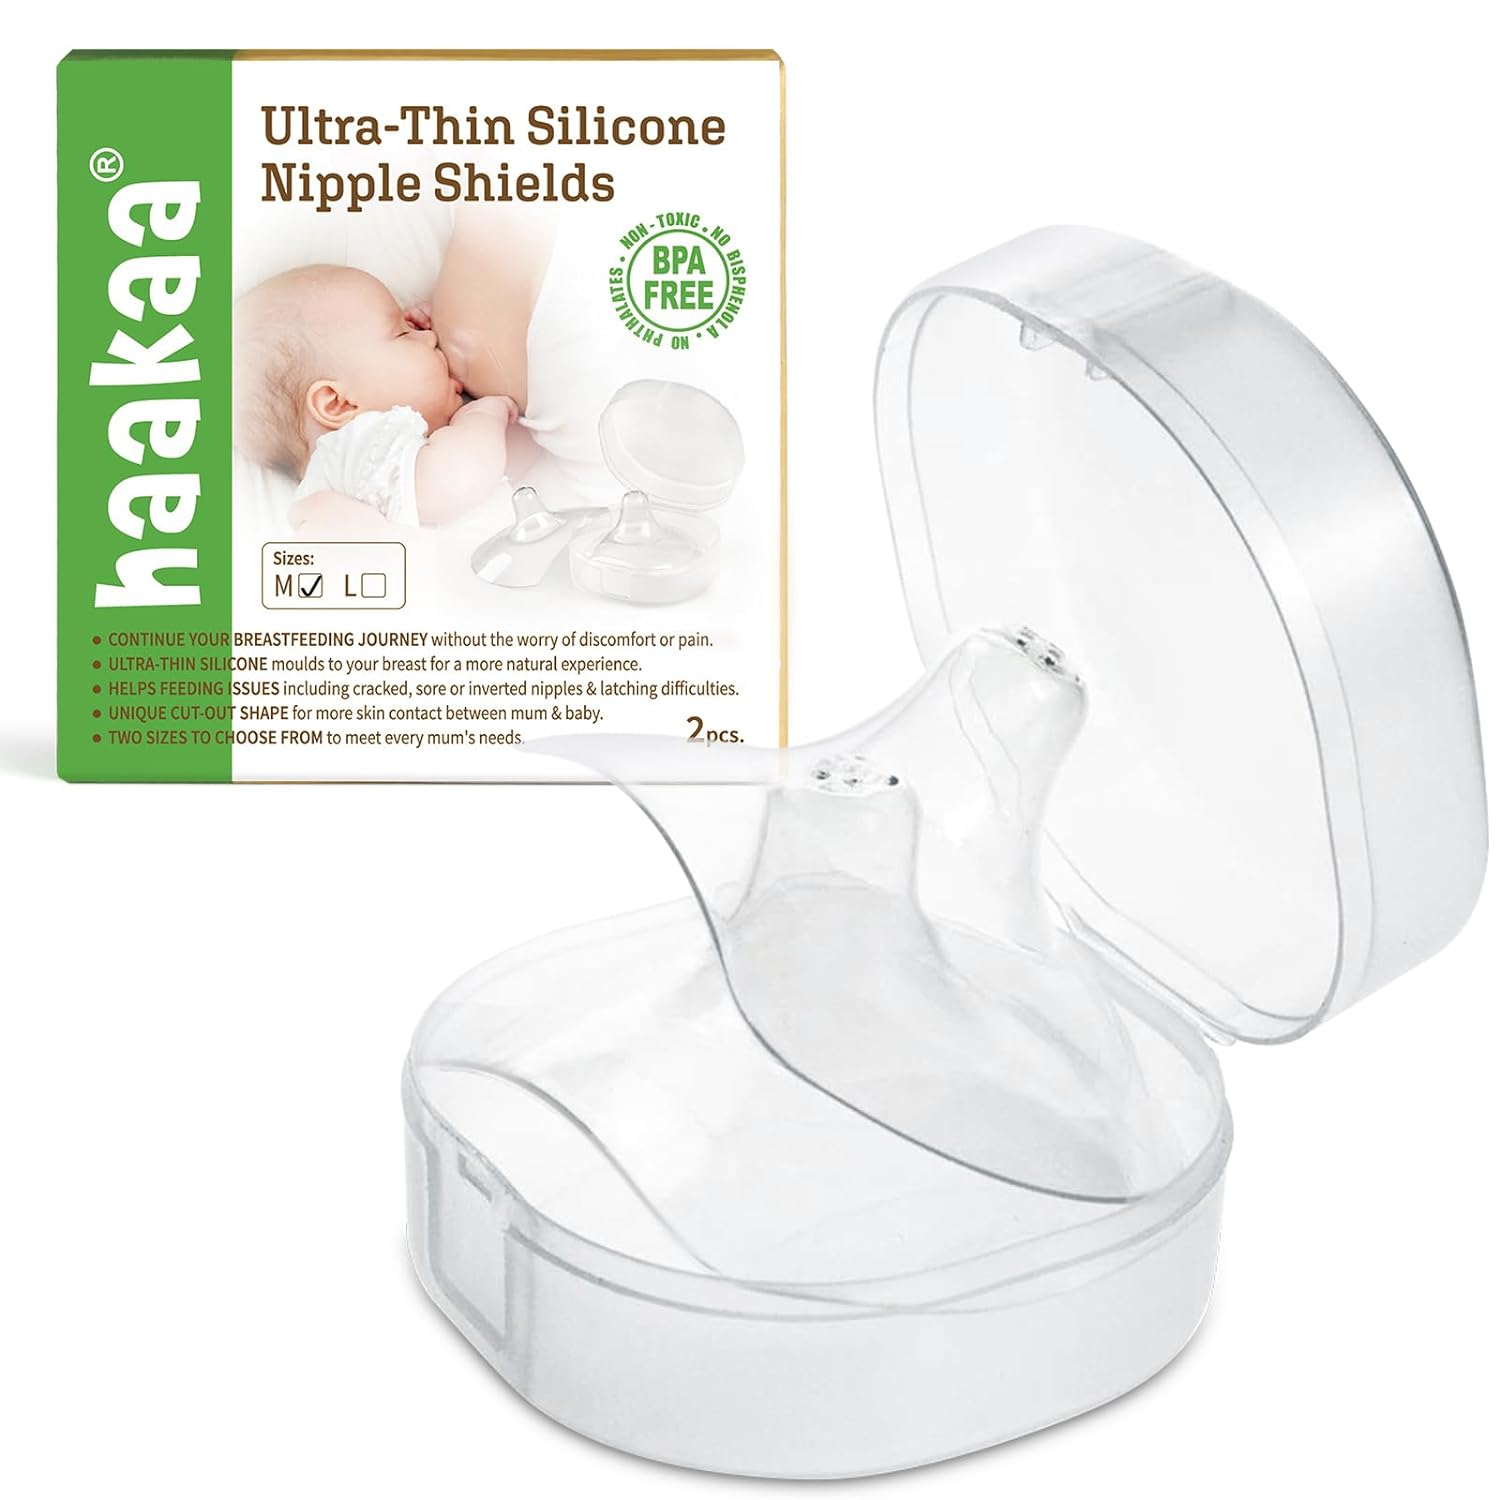 haakaa Nippleshield Silicone Nipple Shields for Breastfeeding with Carry Case Ultra-Thin Super-Soft (18mm, 2pk)